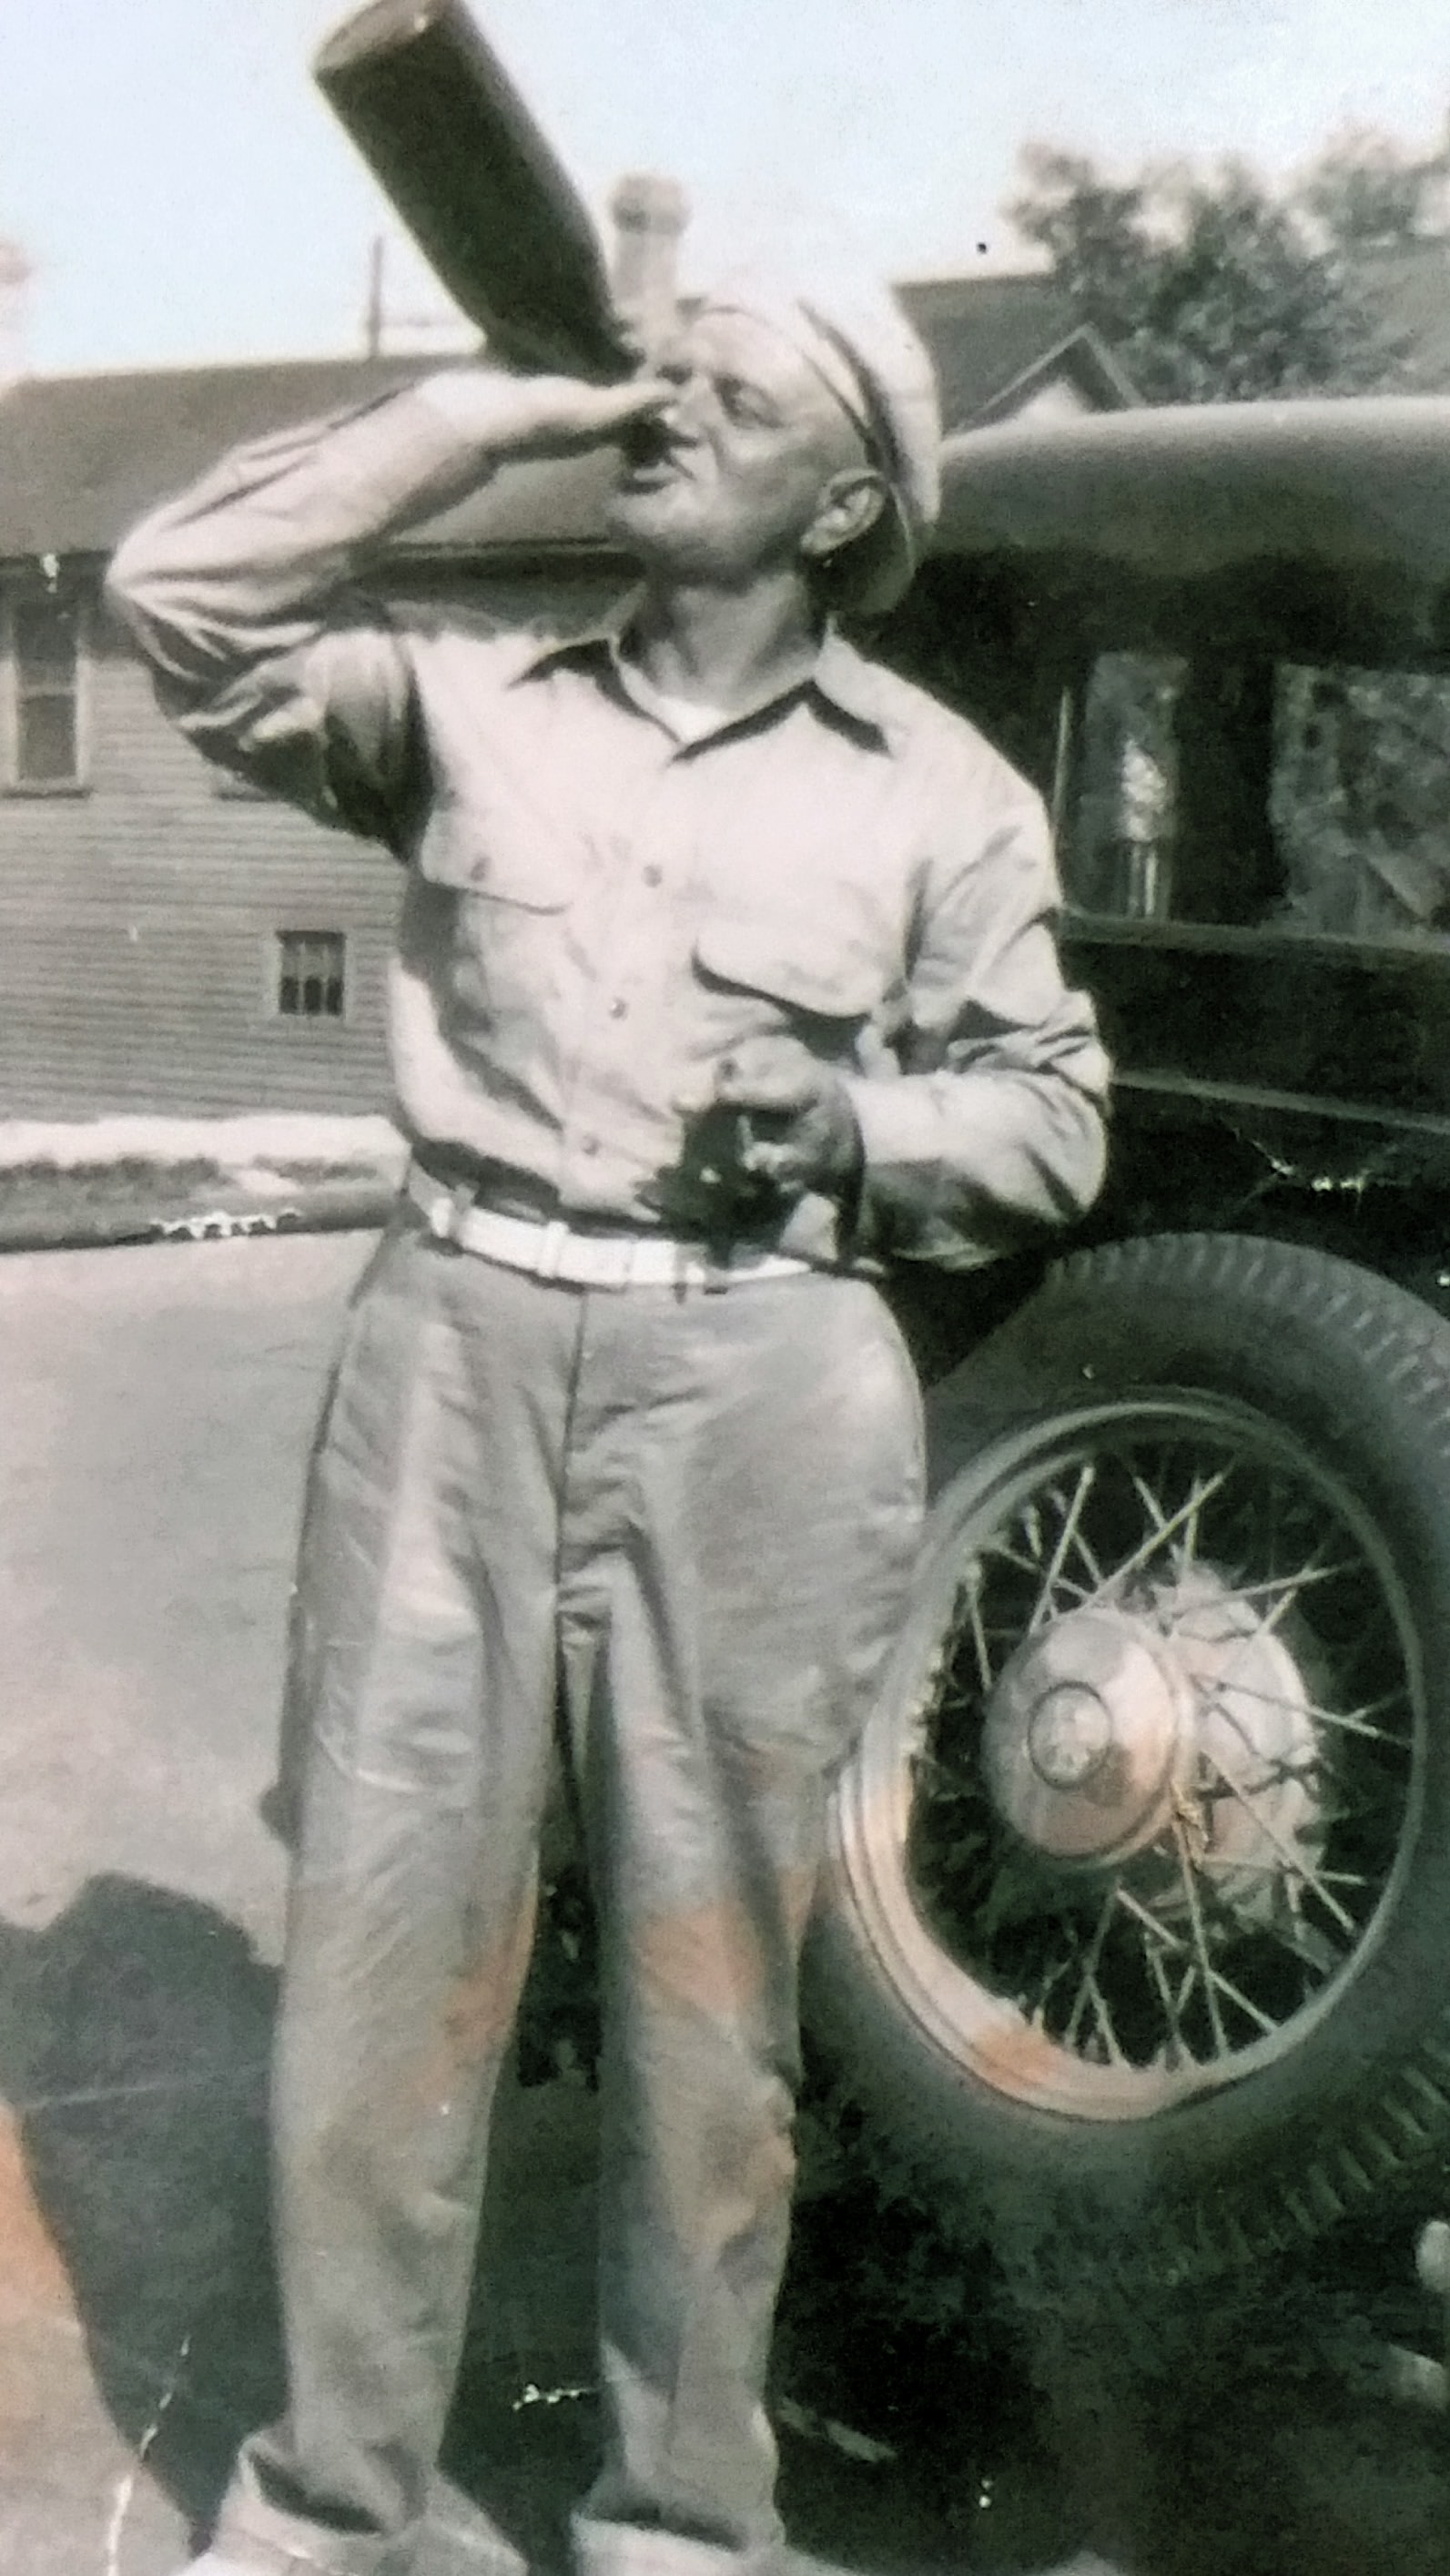 Maternal grandfather, streetcar electrician. Never knew the man only the legend. As the story goes, my eldest brother killed him with kindness feeding cookies to a diabetic, go figure. The sacrifices a grandparent will make.